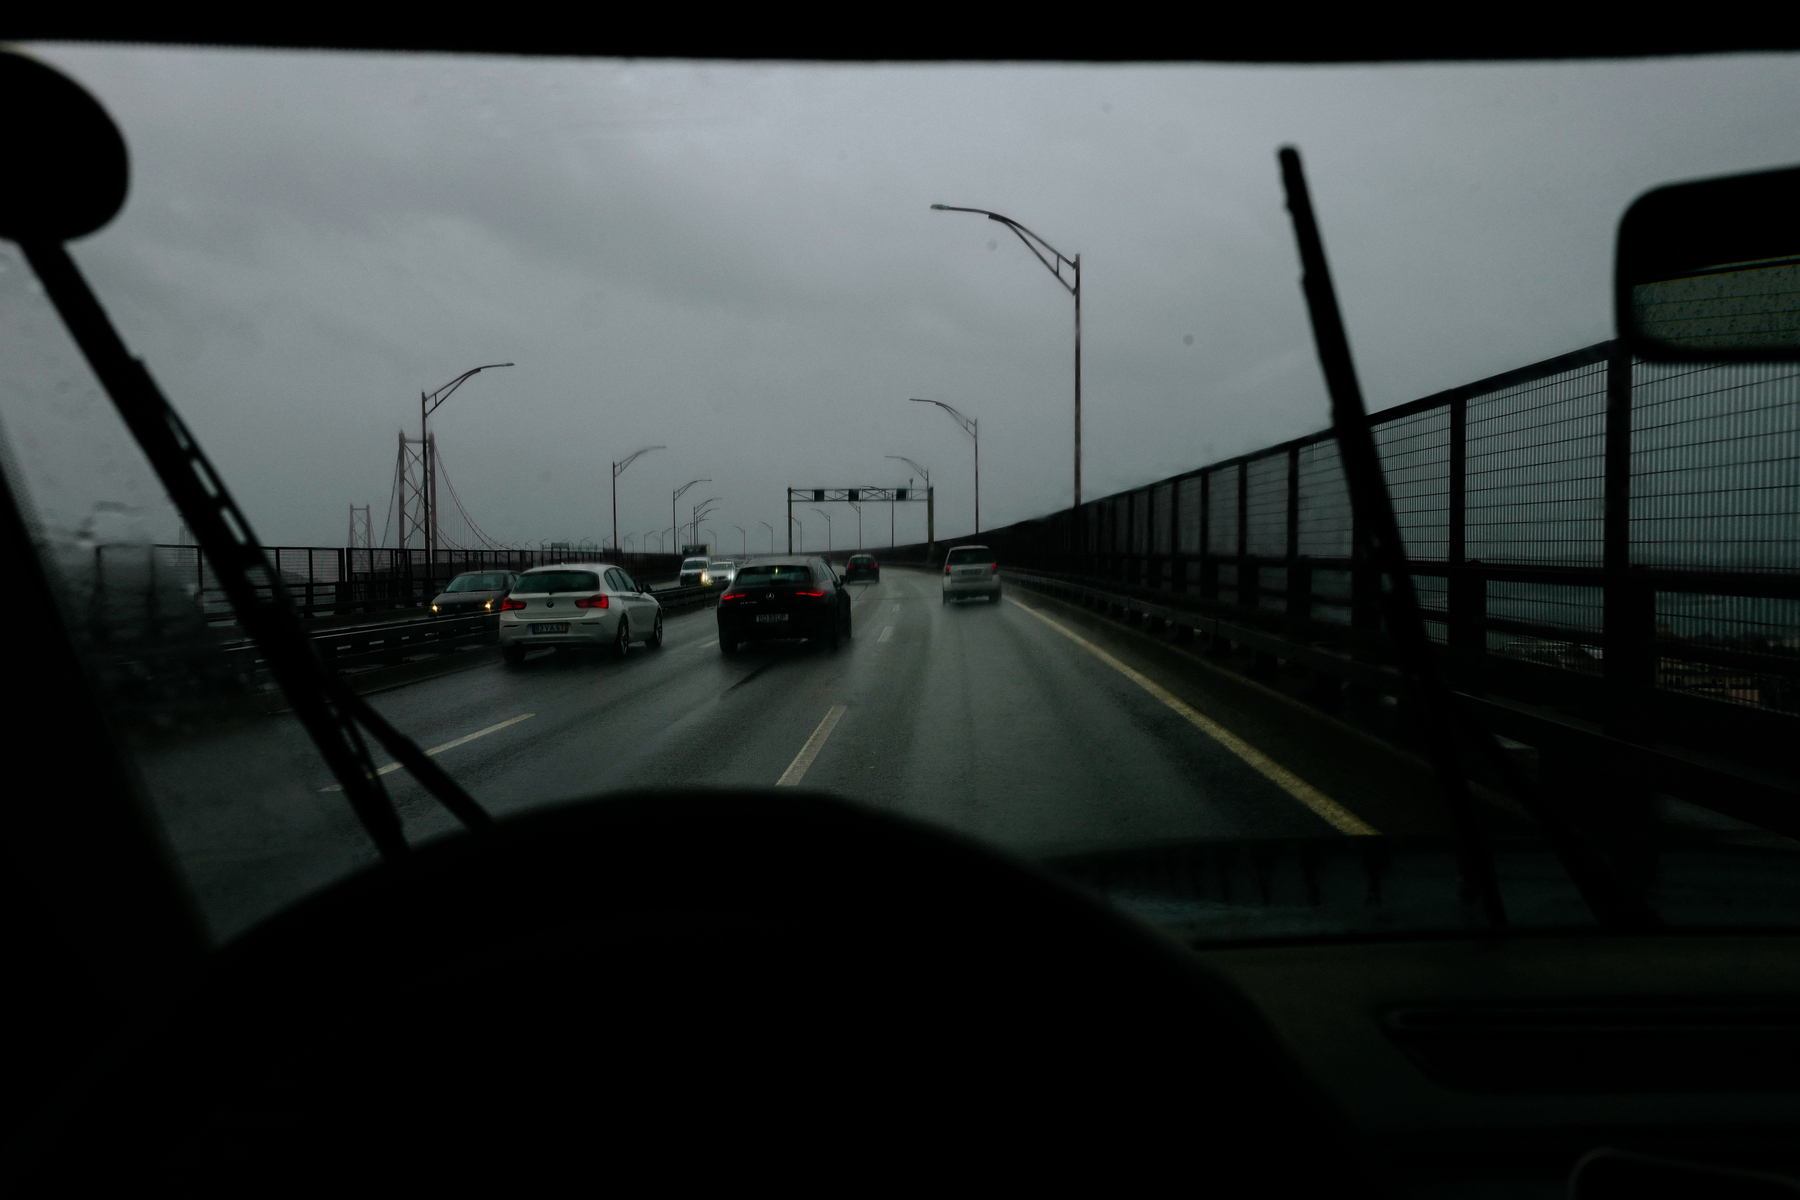 View from inside a vehicle crossing a bridge on a rainy day, with other cars traveling on the road and overcast skies above.